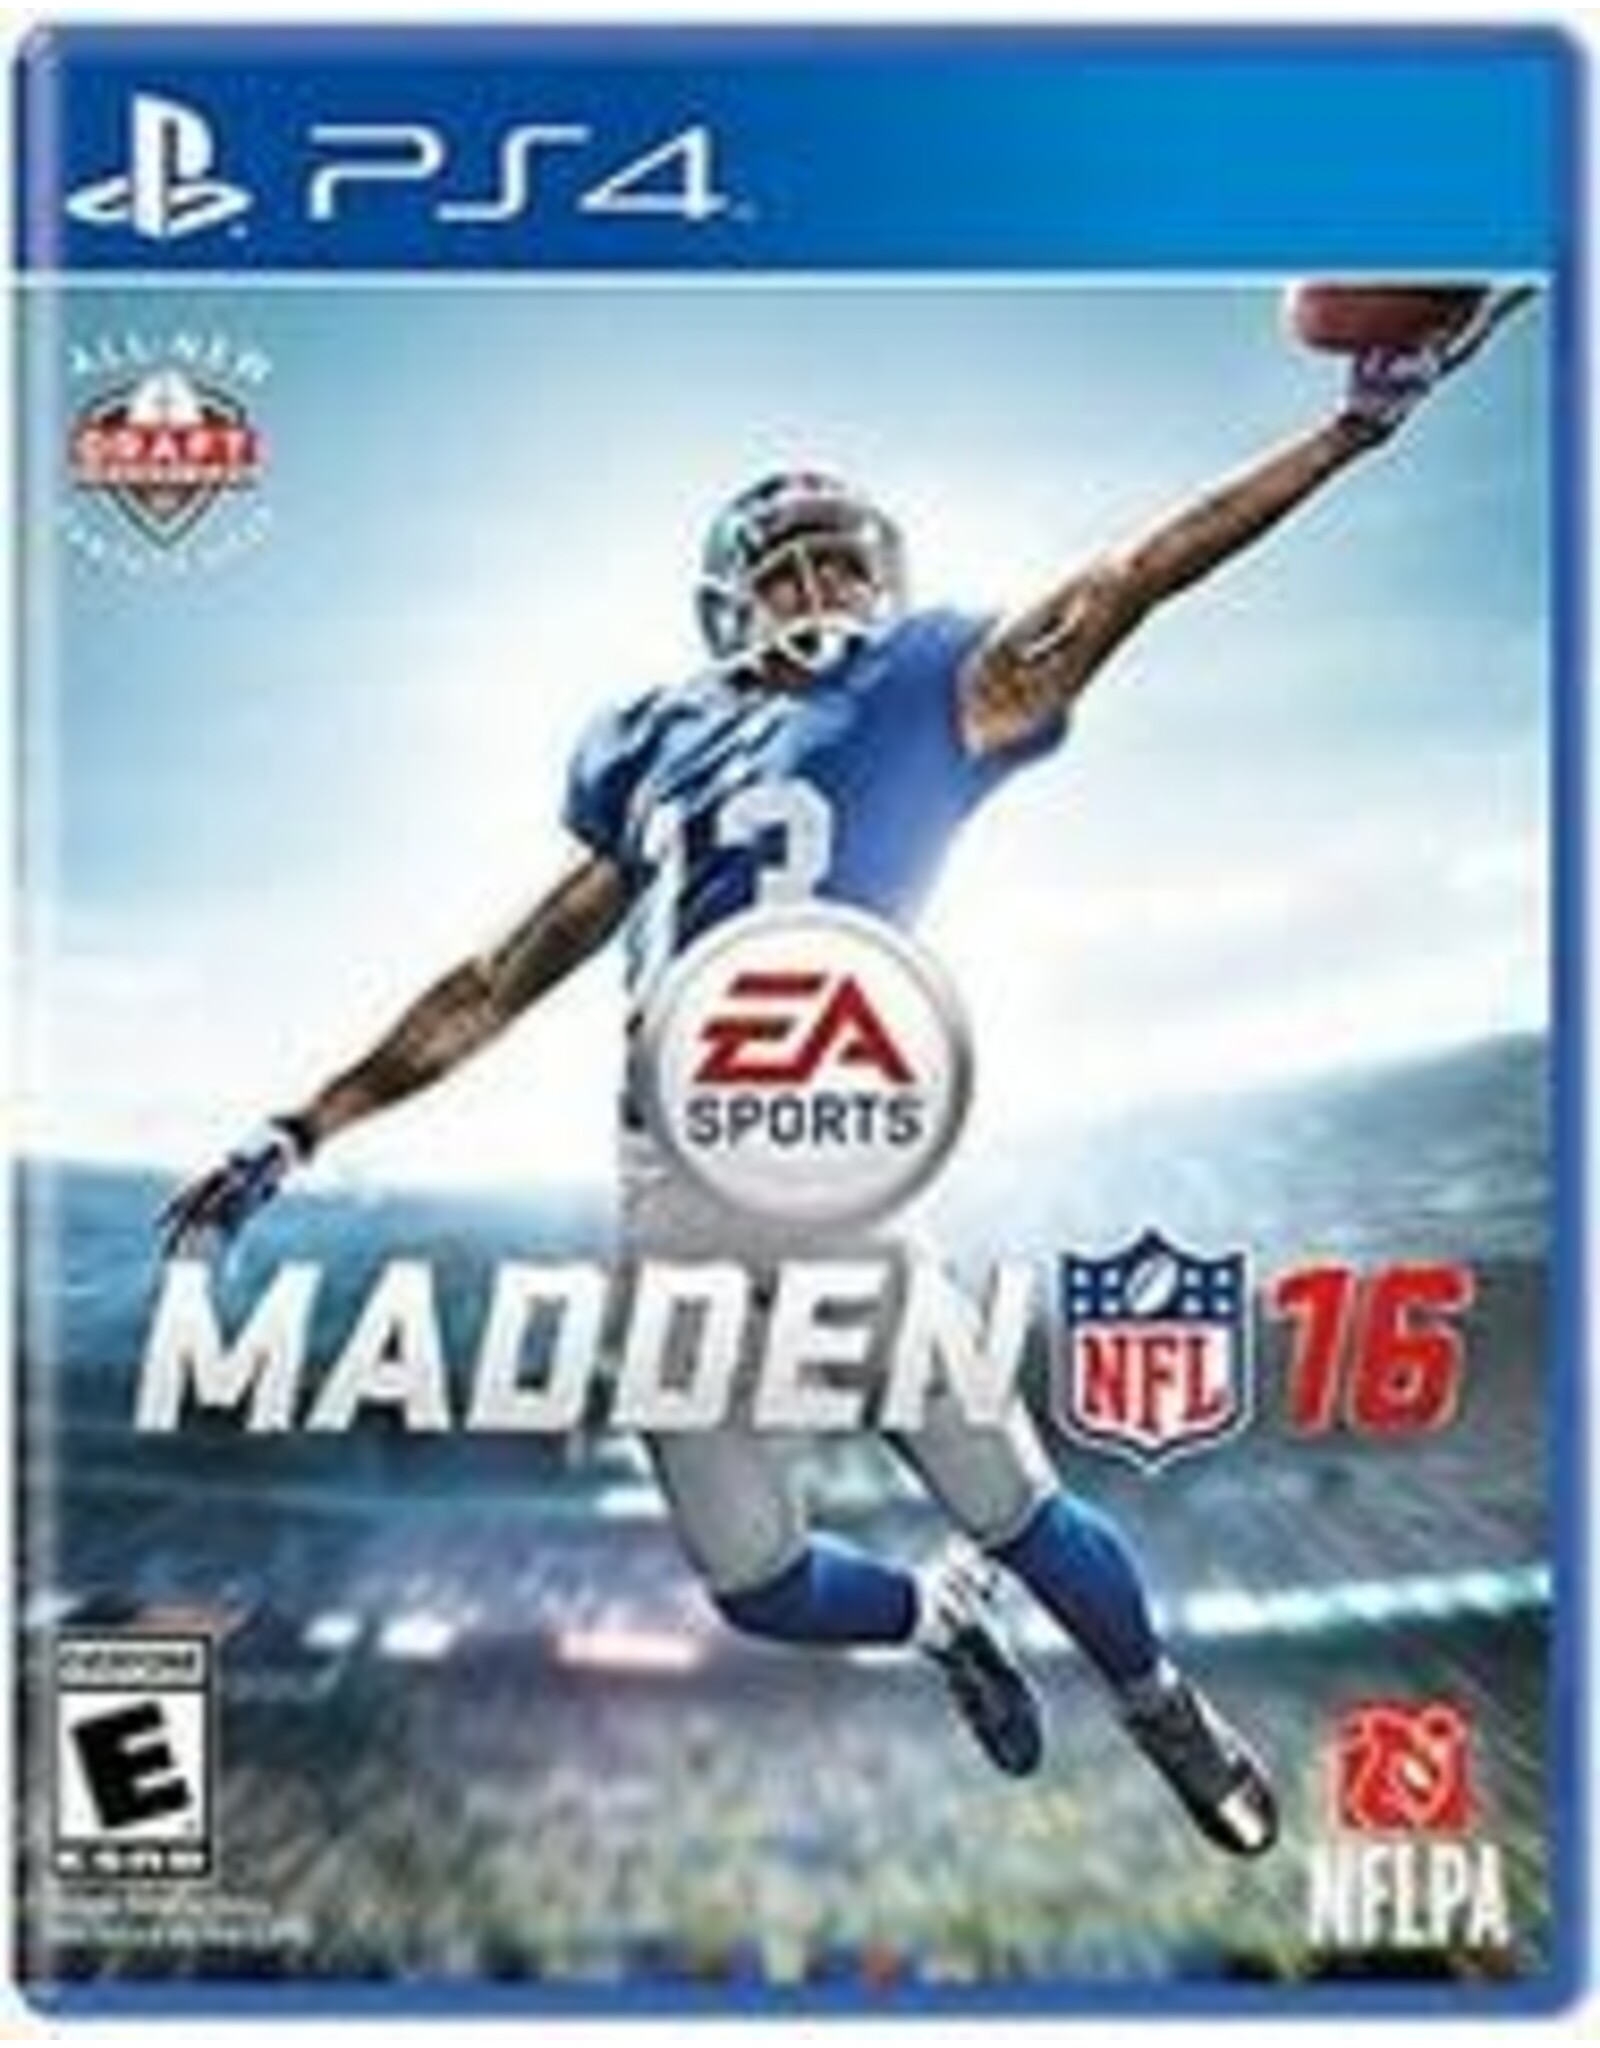 Playstation 4 Madden NFL 16 (Used)